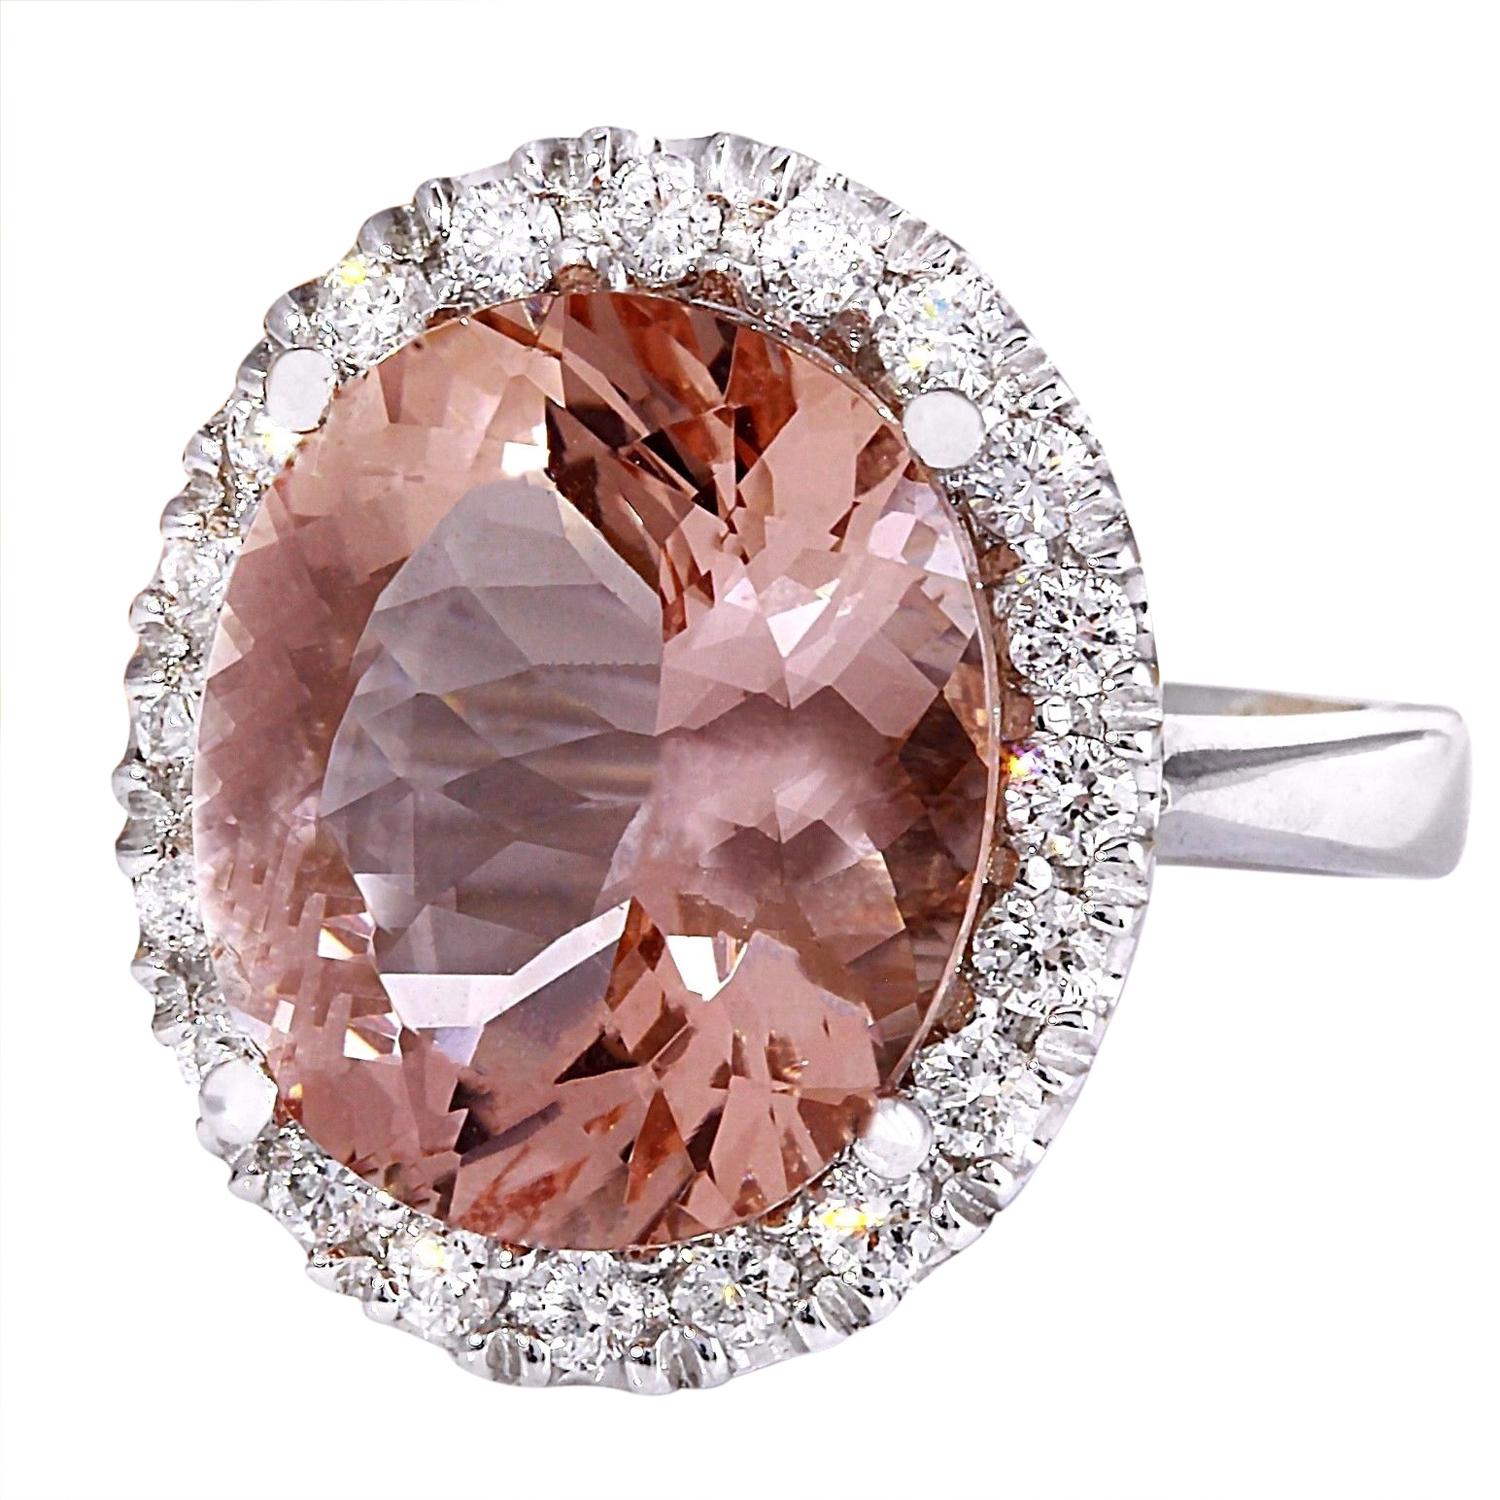 7.82 Carat Natural Morganite 14K Solid White Gold Diamond Ring
 Item Type: Ring
 Item Style: Cocktail
 Material: 14K White Gold
 Mainstone: Morganite
 Stone Color: Peach
 Stone Weight: 7.02 Carat
 Stone Shape: Oval
 Stone Quantity: 1
 Stone